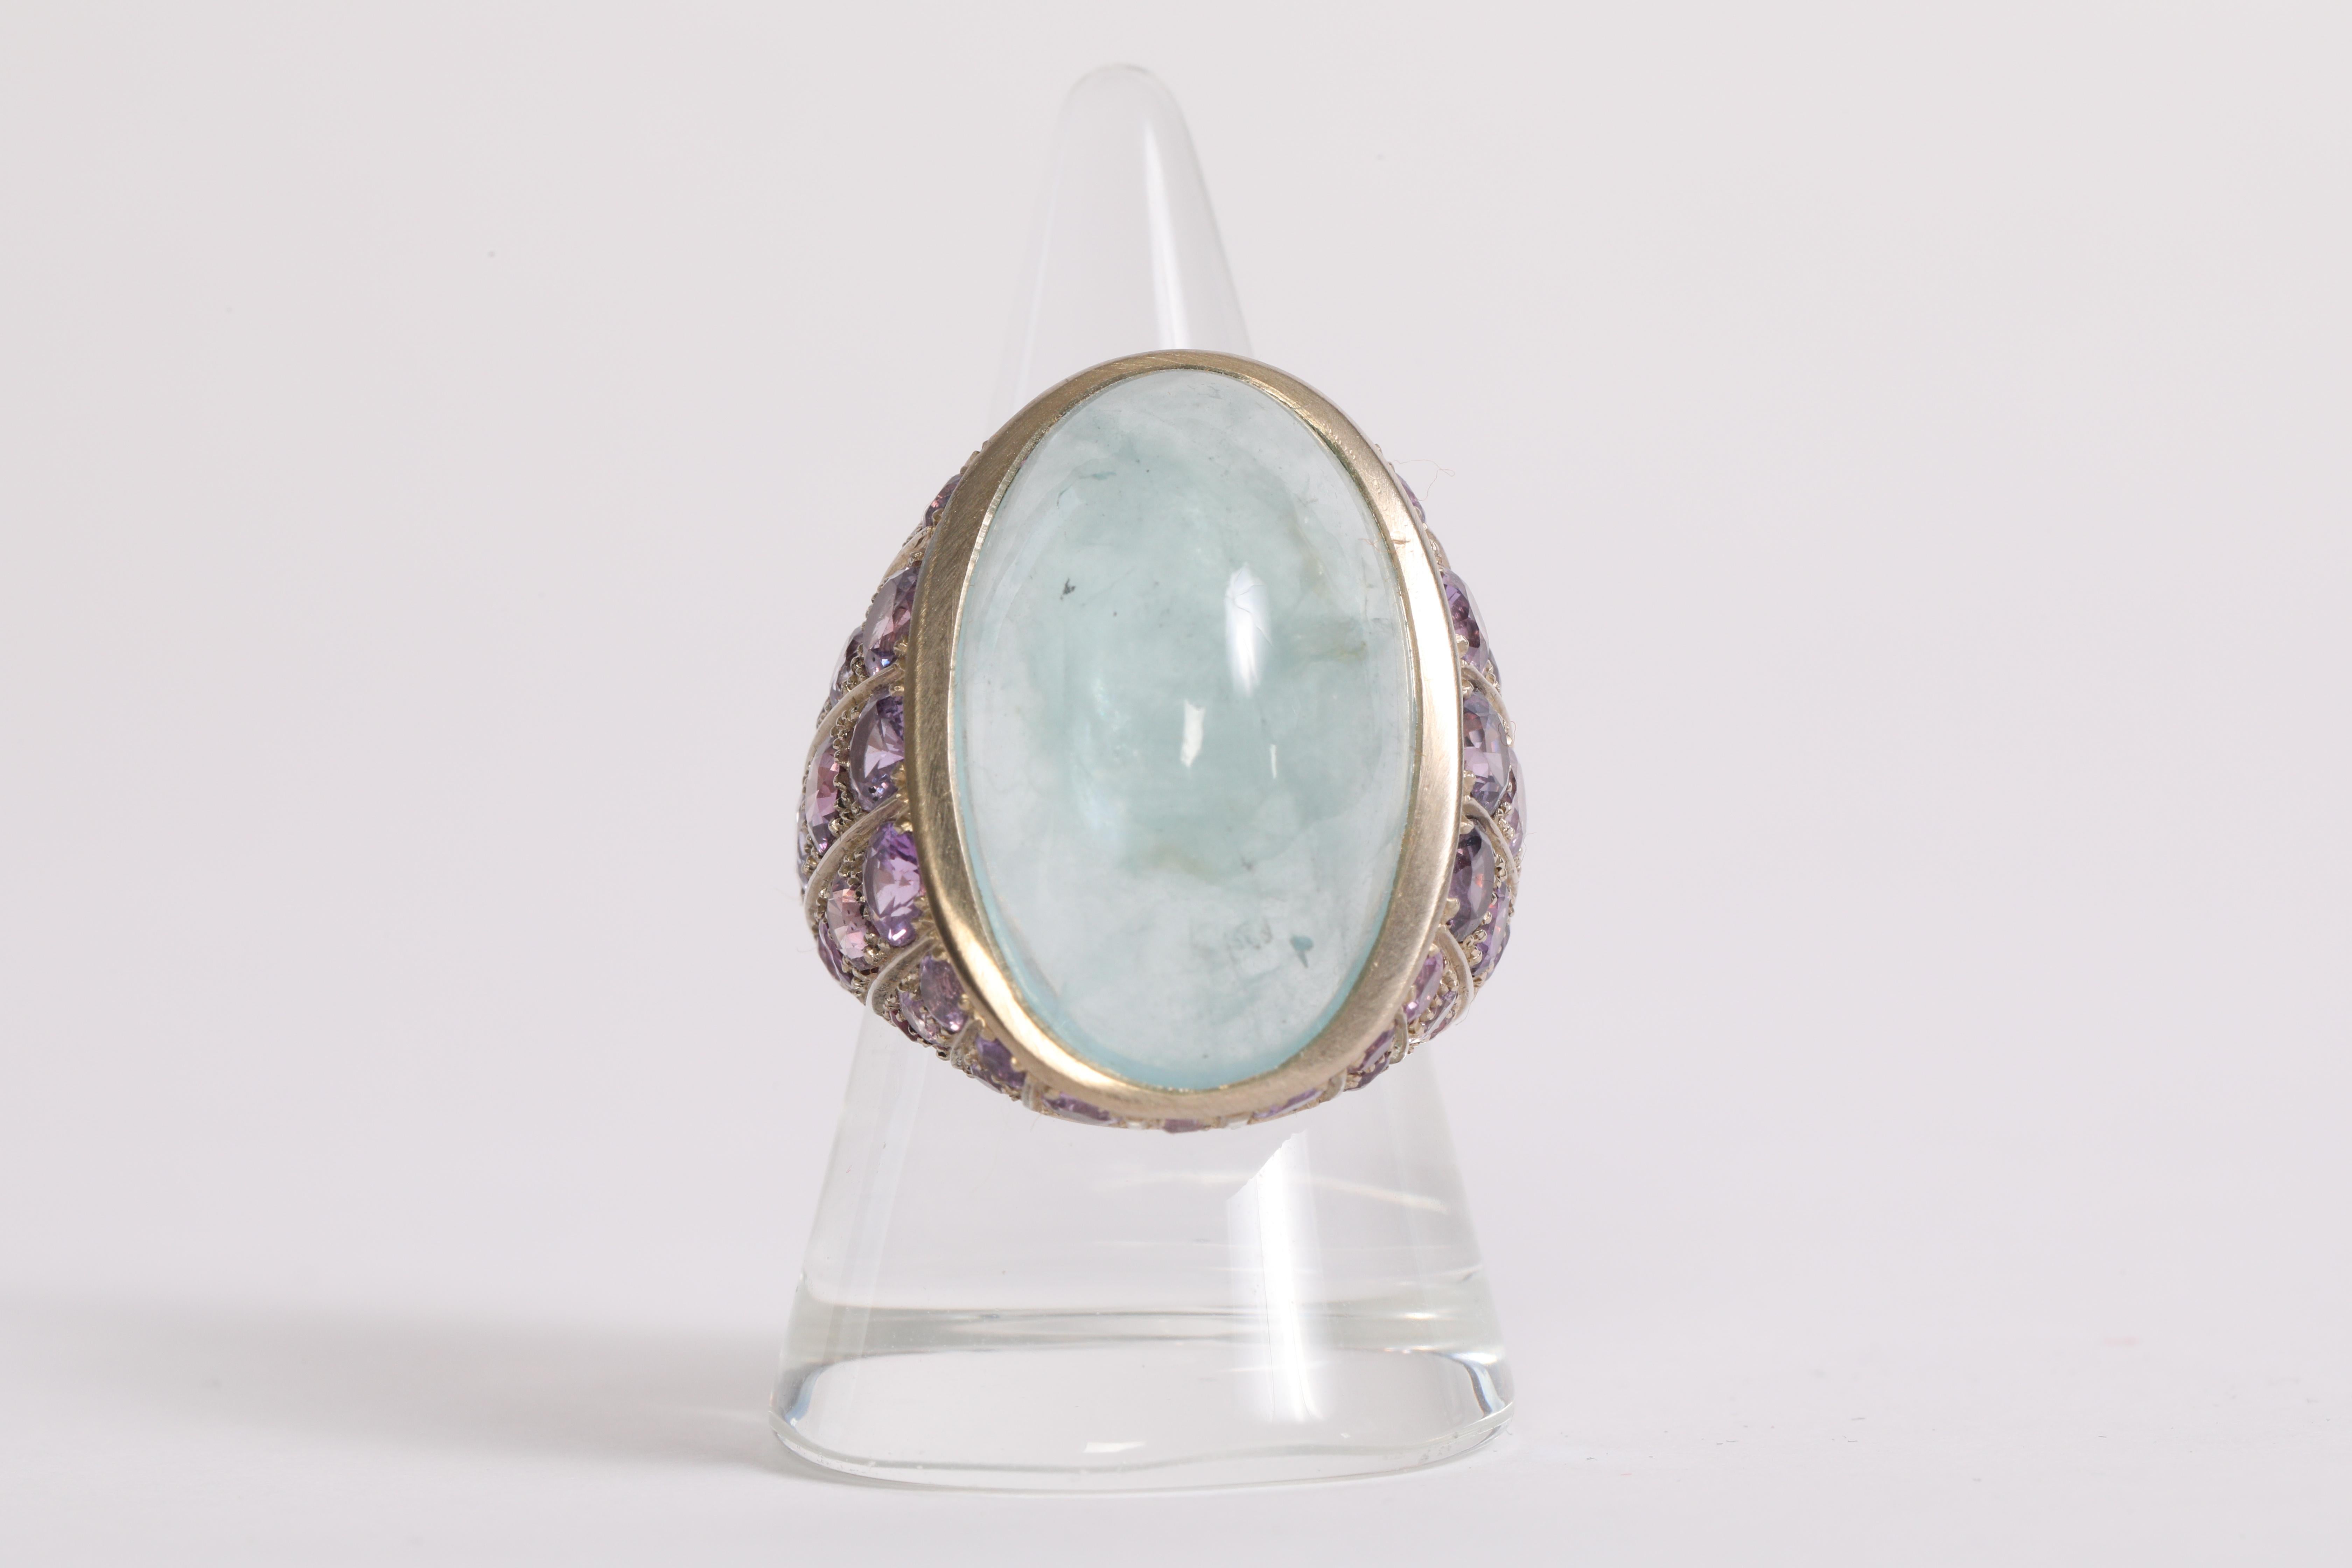 This beautiful 18K white gold ring is set with a degradé of purple sapphires and a luminous 18.95 carats aquamarine cabochon.
Very elegant.
Finger size: 54 or 6 3/4  can be adjusted
Created by Marion Jeantet
Price without local taxes
Total weight: